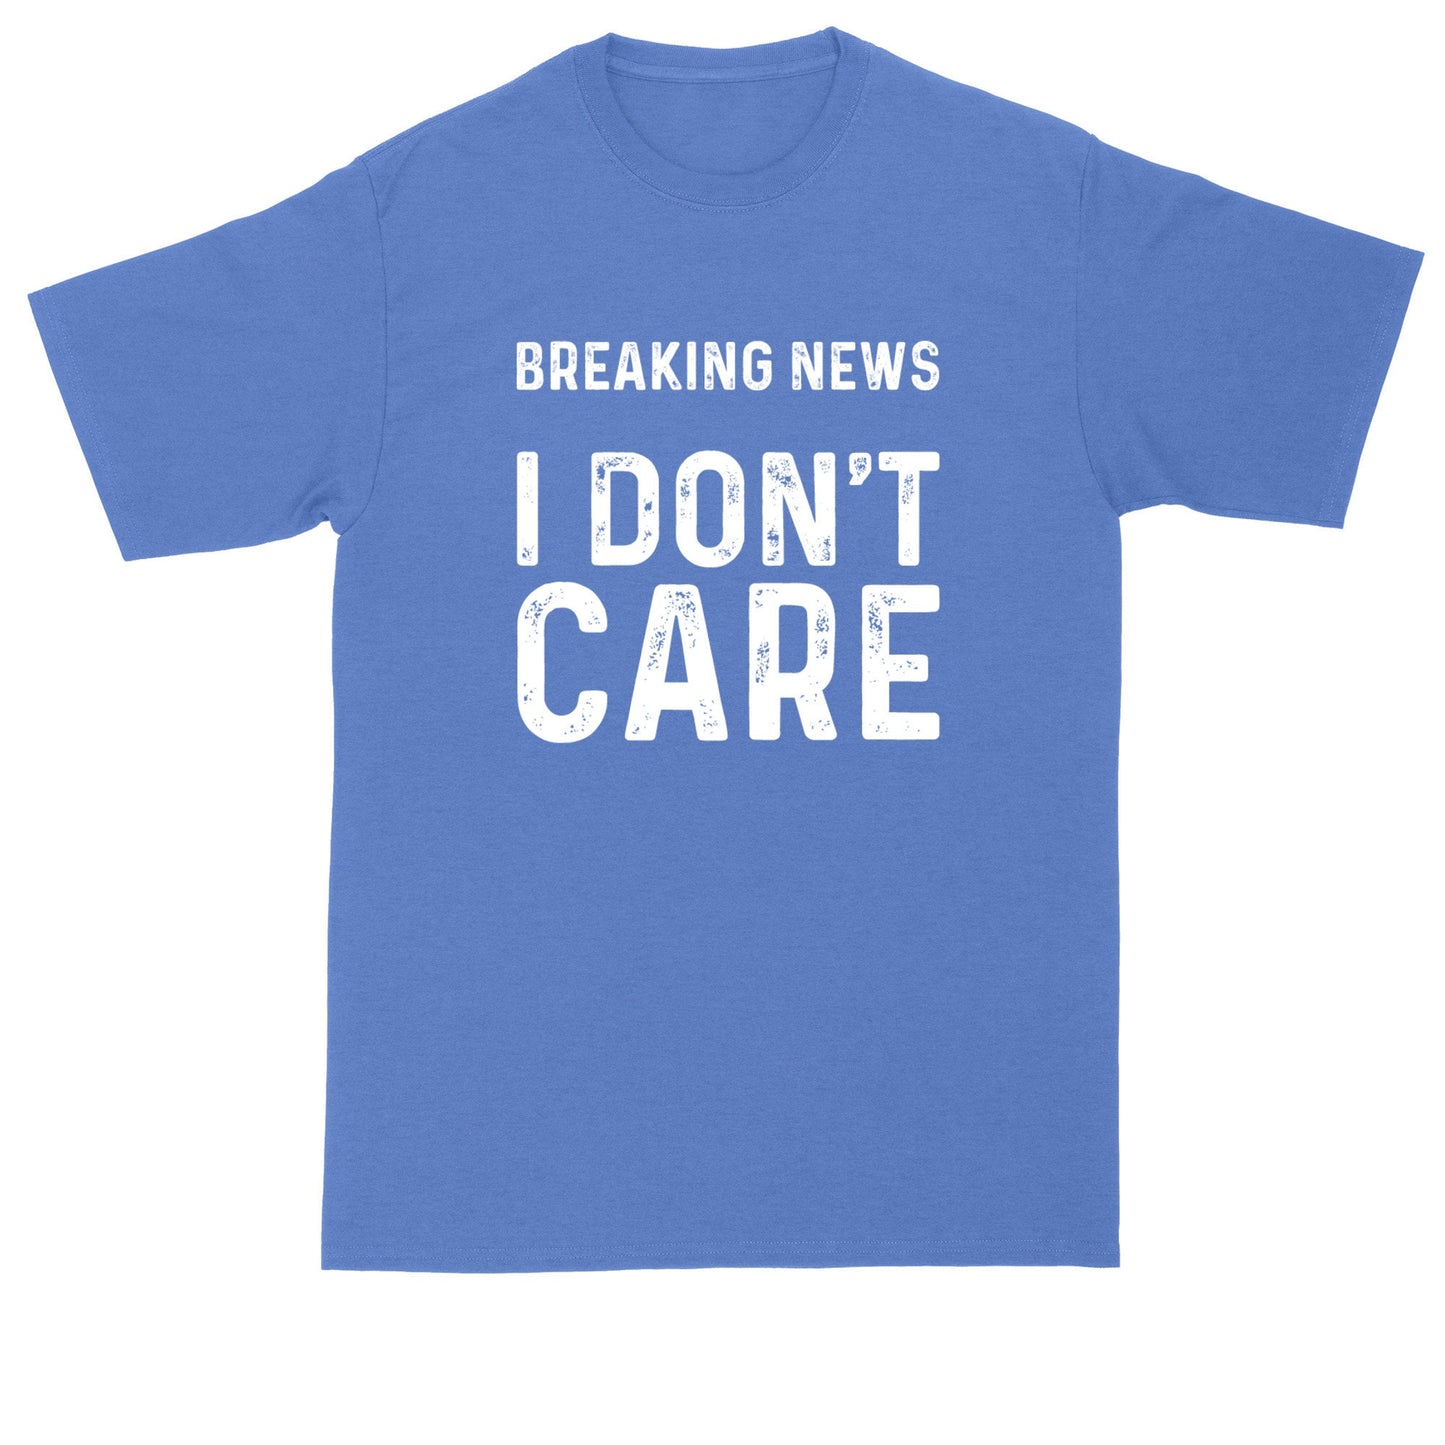 Breaking News I Don't Care | Mens Big and Tall Shirts | Funny T-Shirt | Graphic T-Shirt